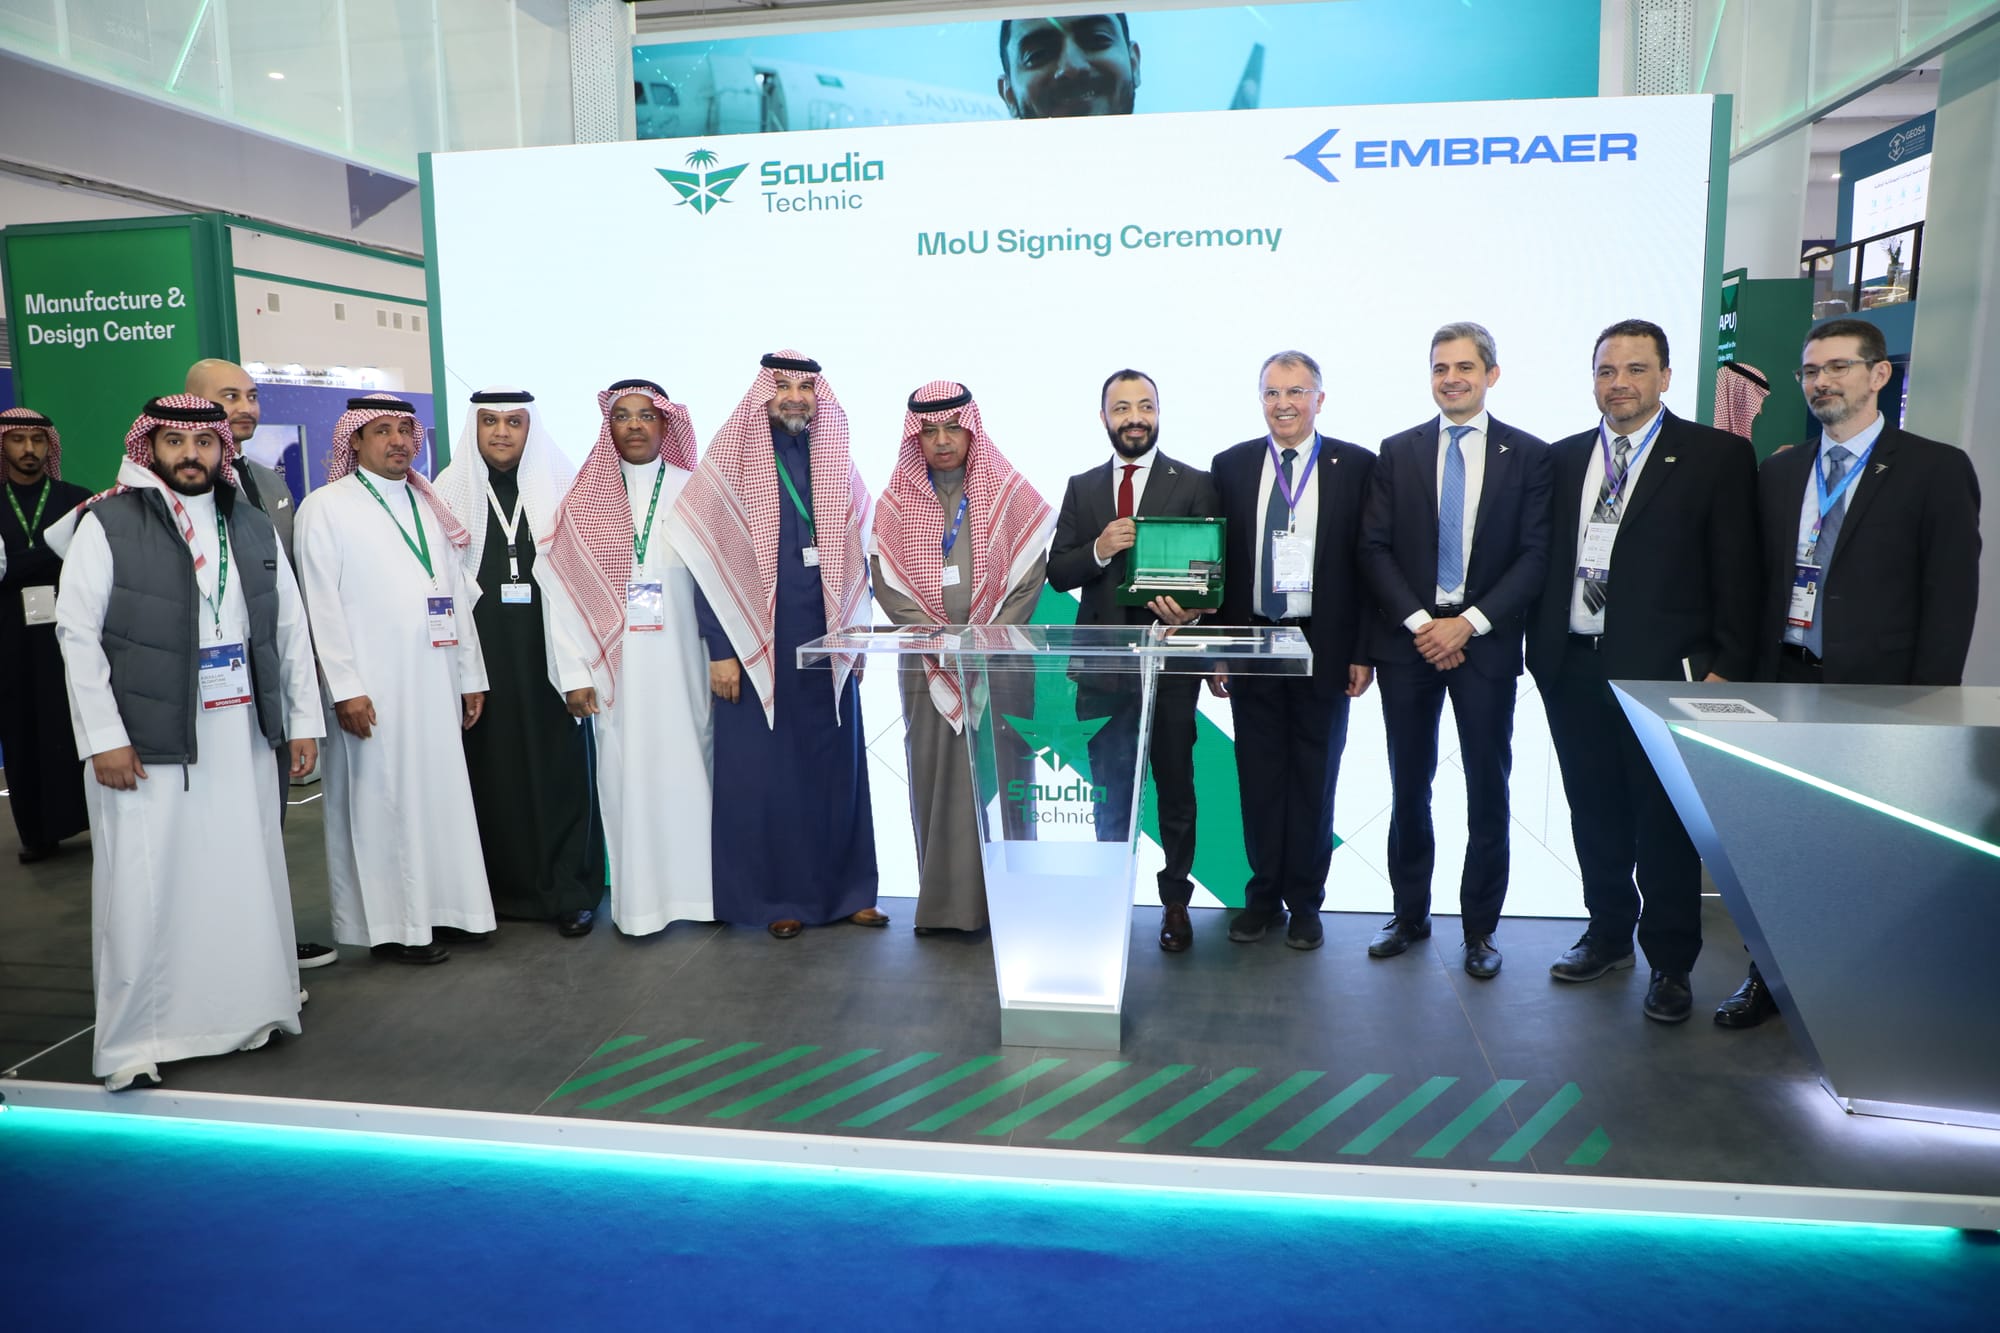 Saudia Technic and Embraer Services & Support sign MoU to start maintenance and training collaboration